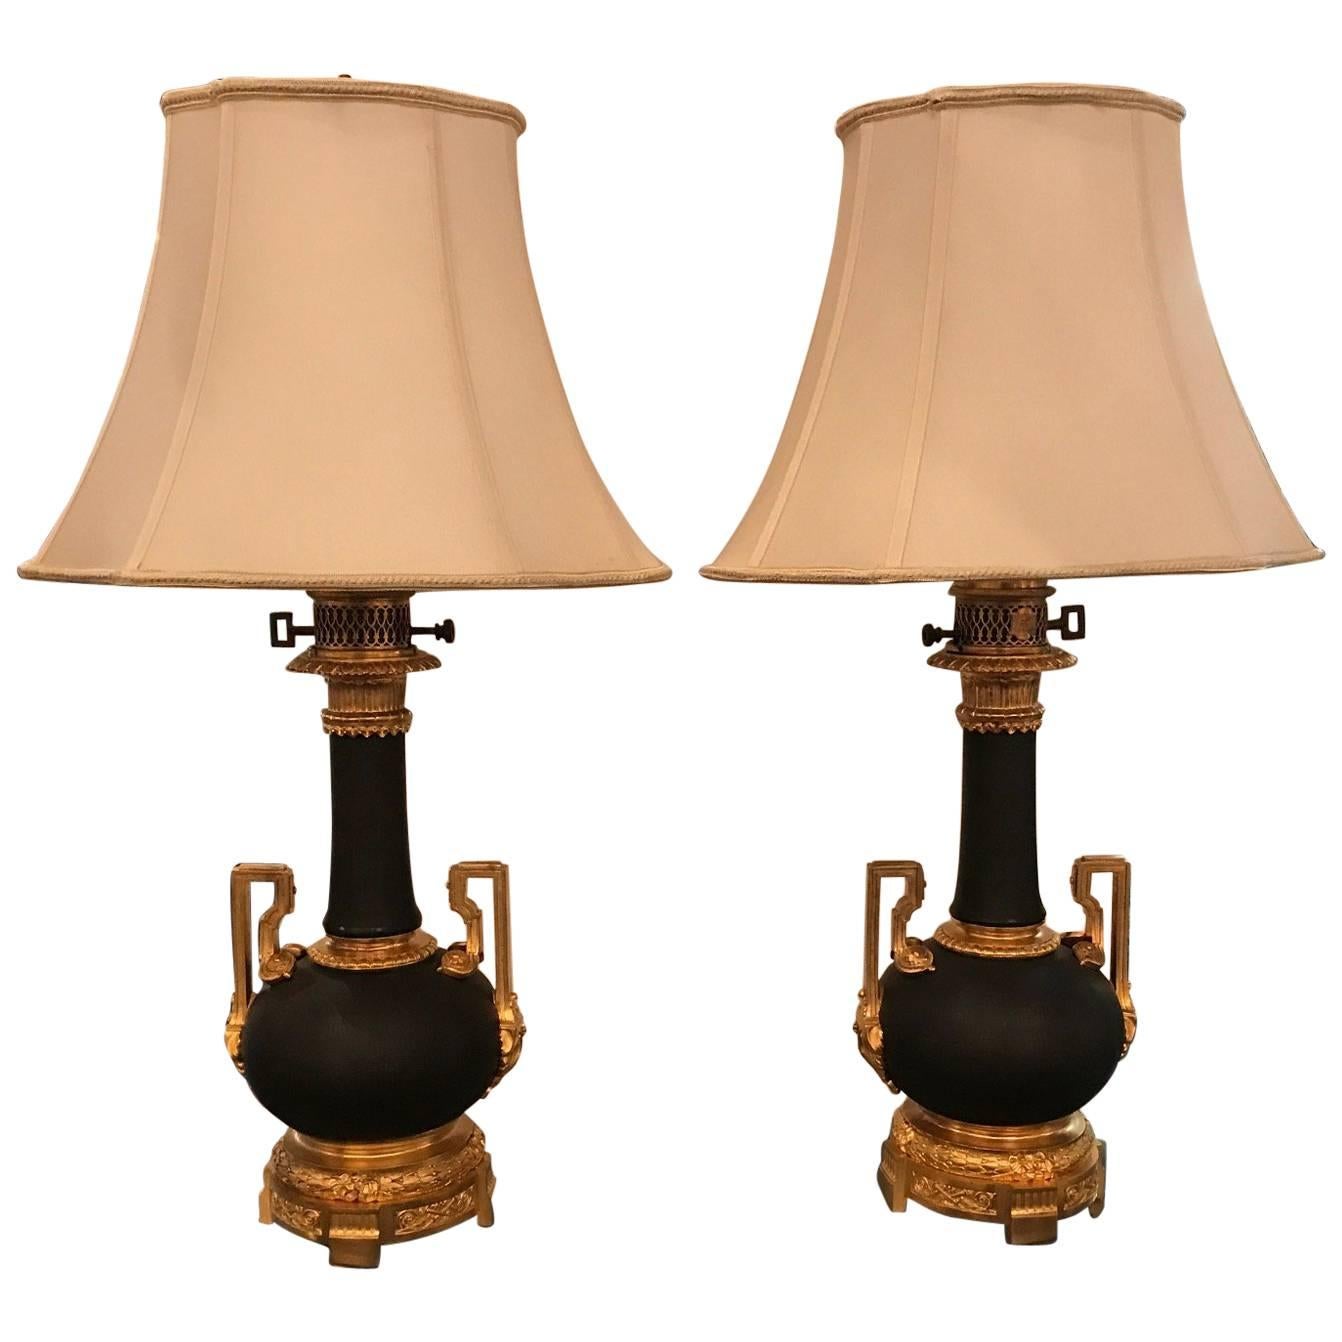 Pair of French Patinated Bronze Oil Lamps with Ormolu Mounts